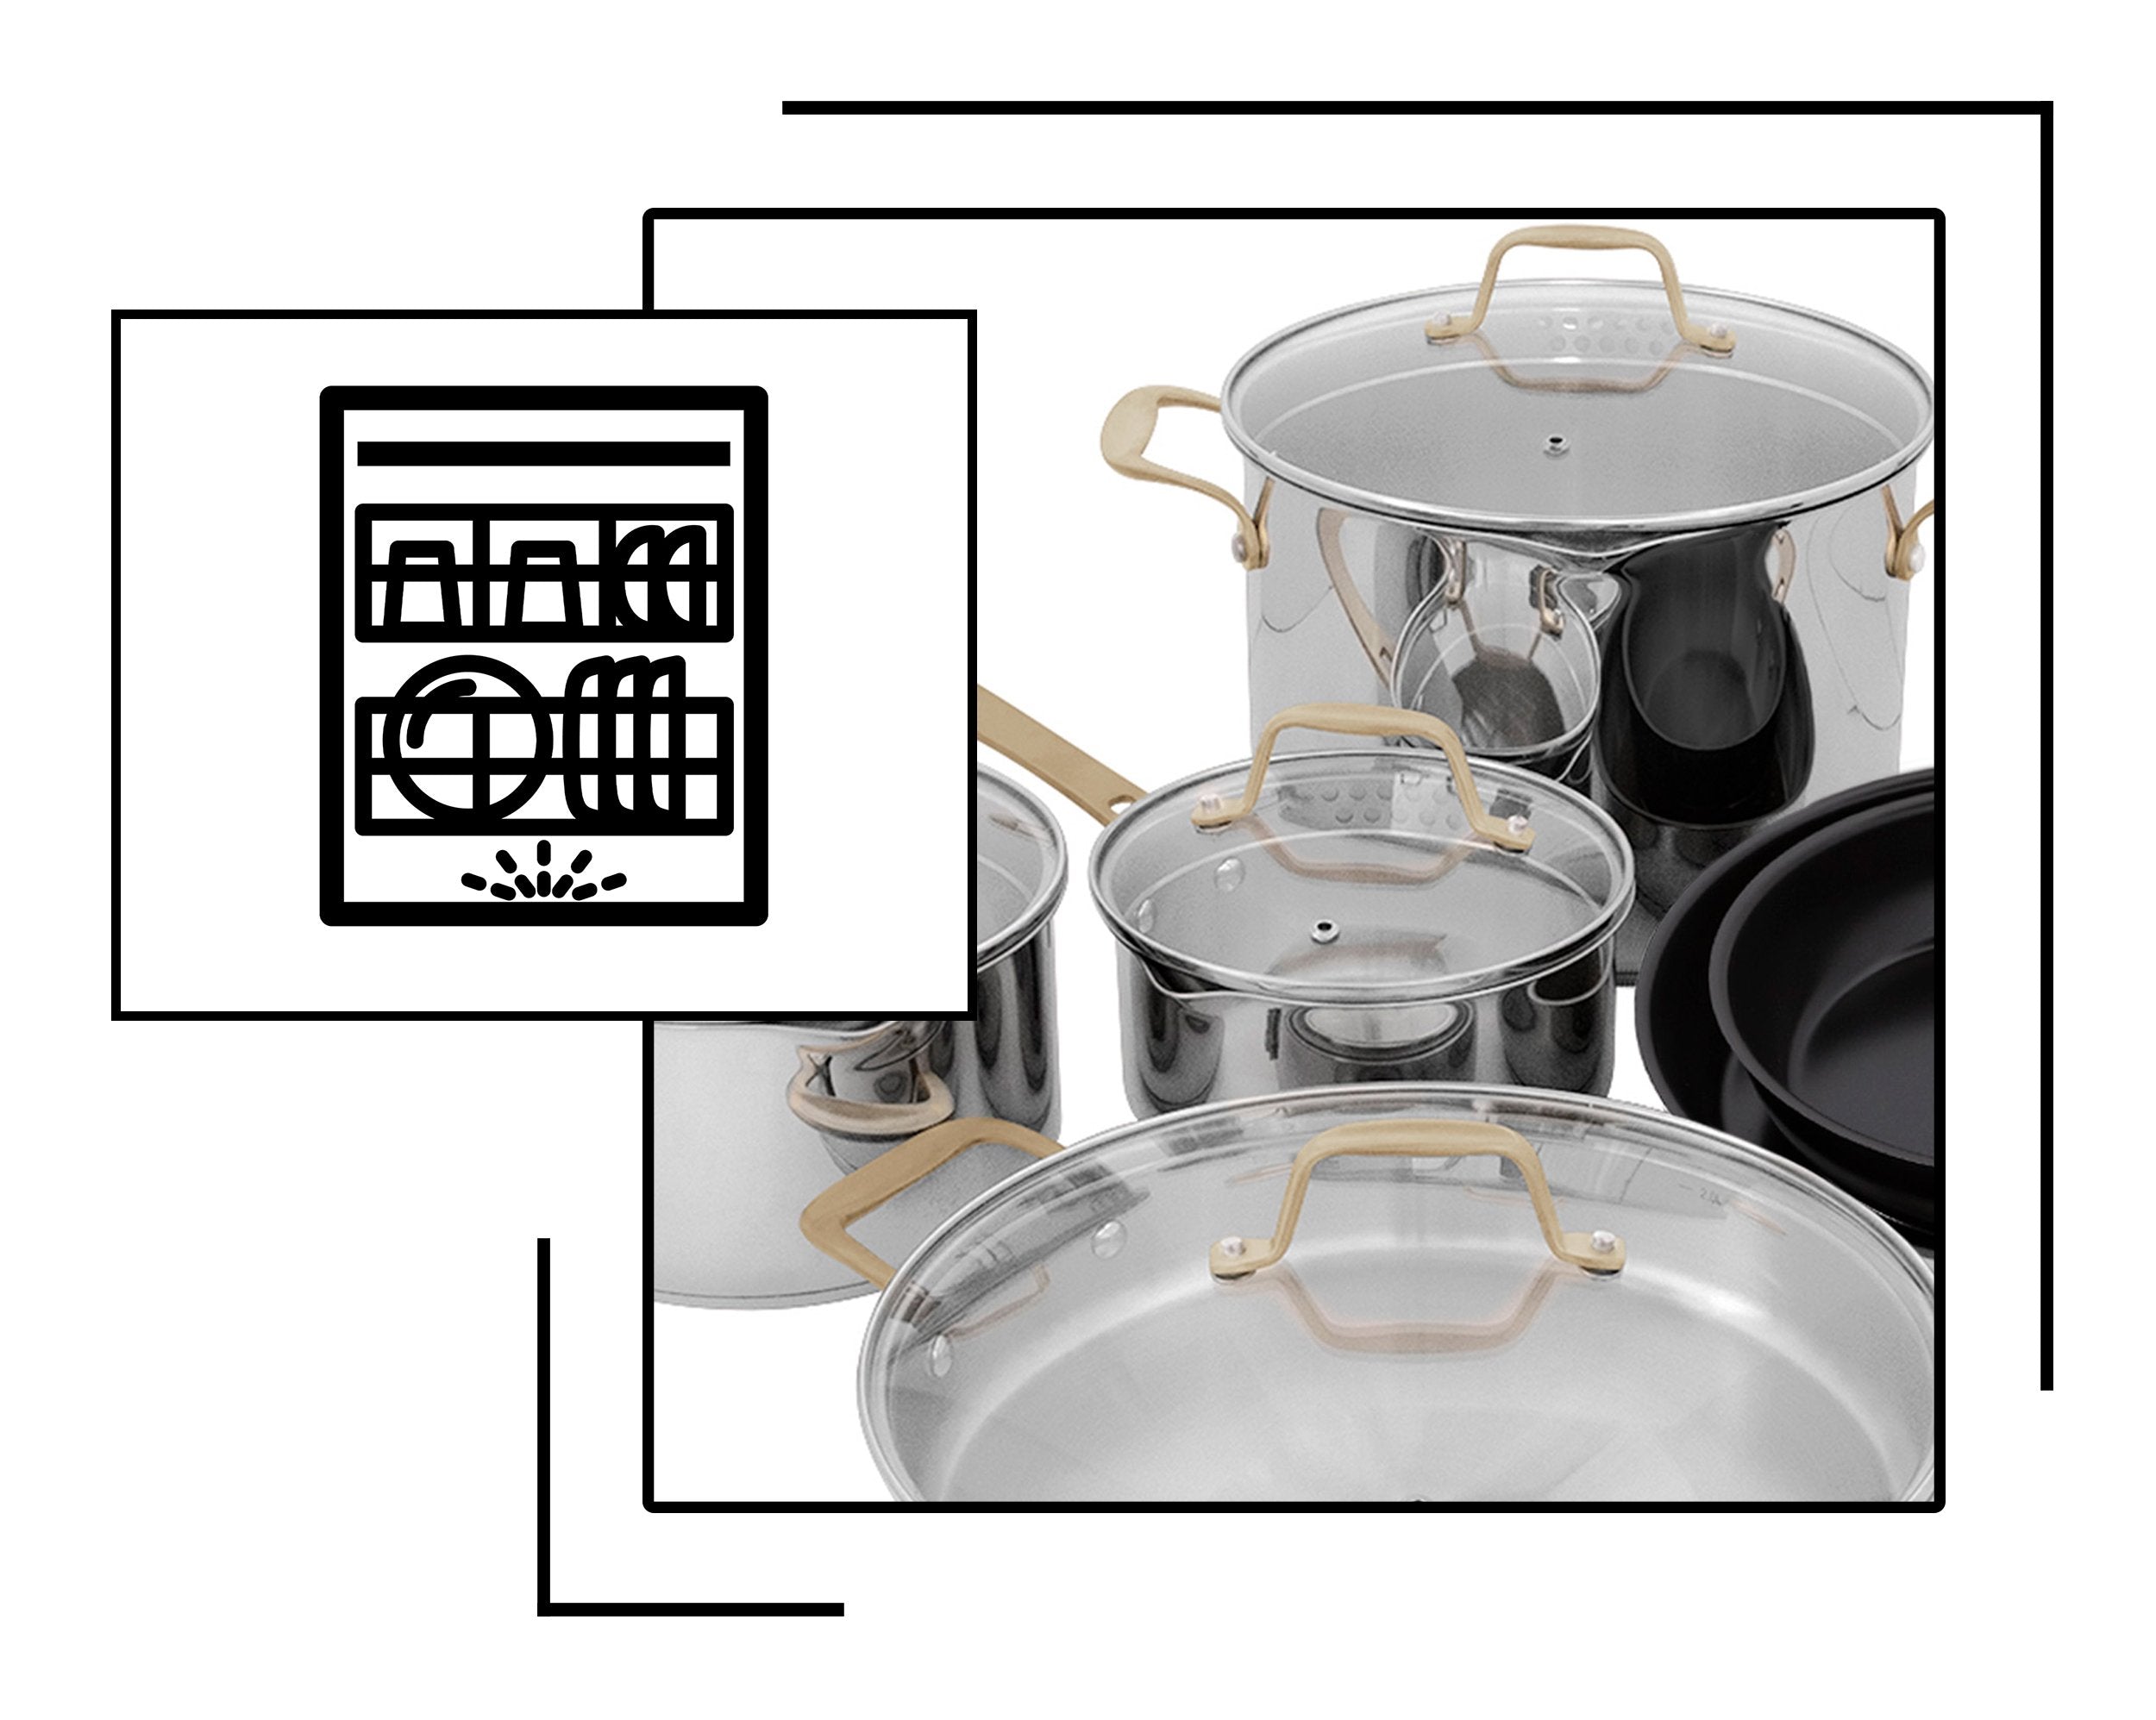 Icon and image representing dishwasher-safe cookware